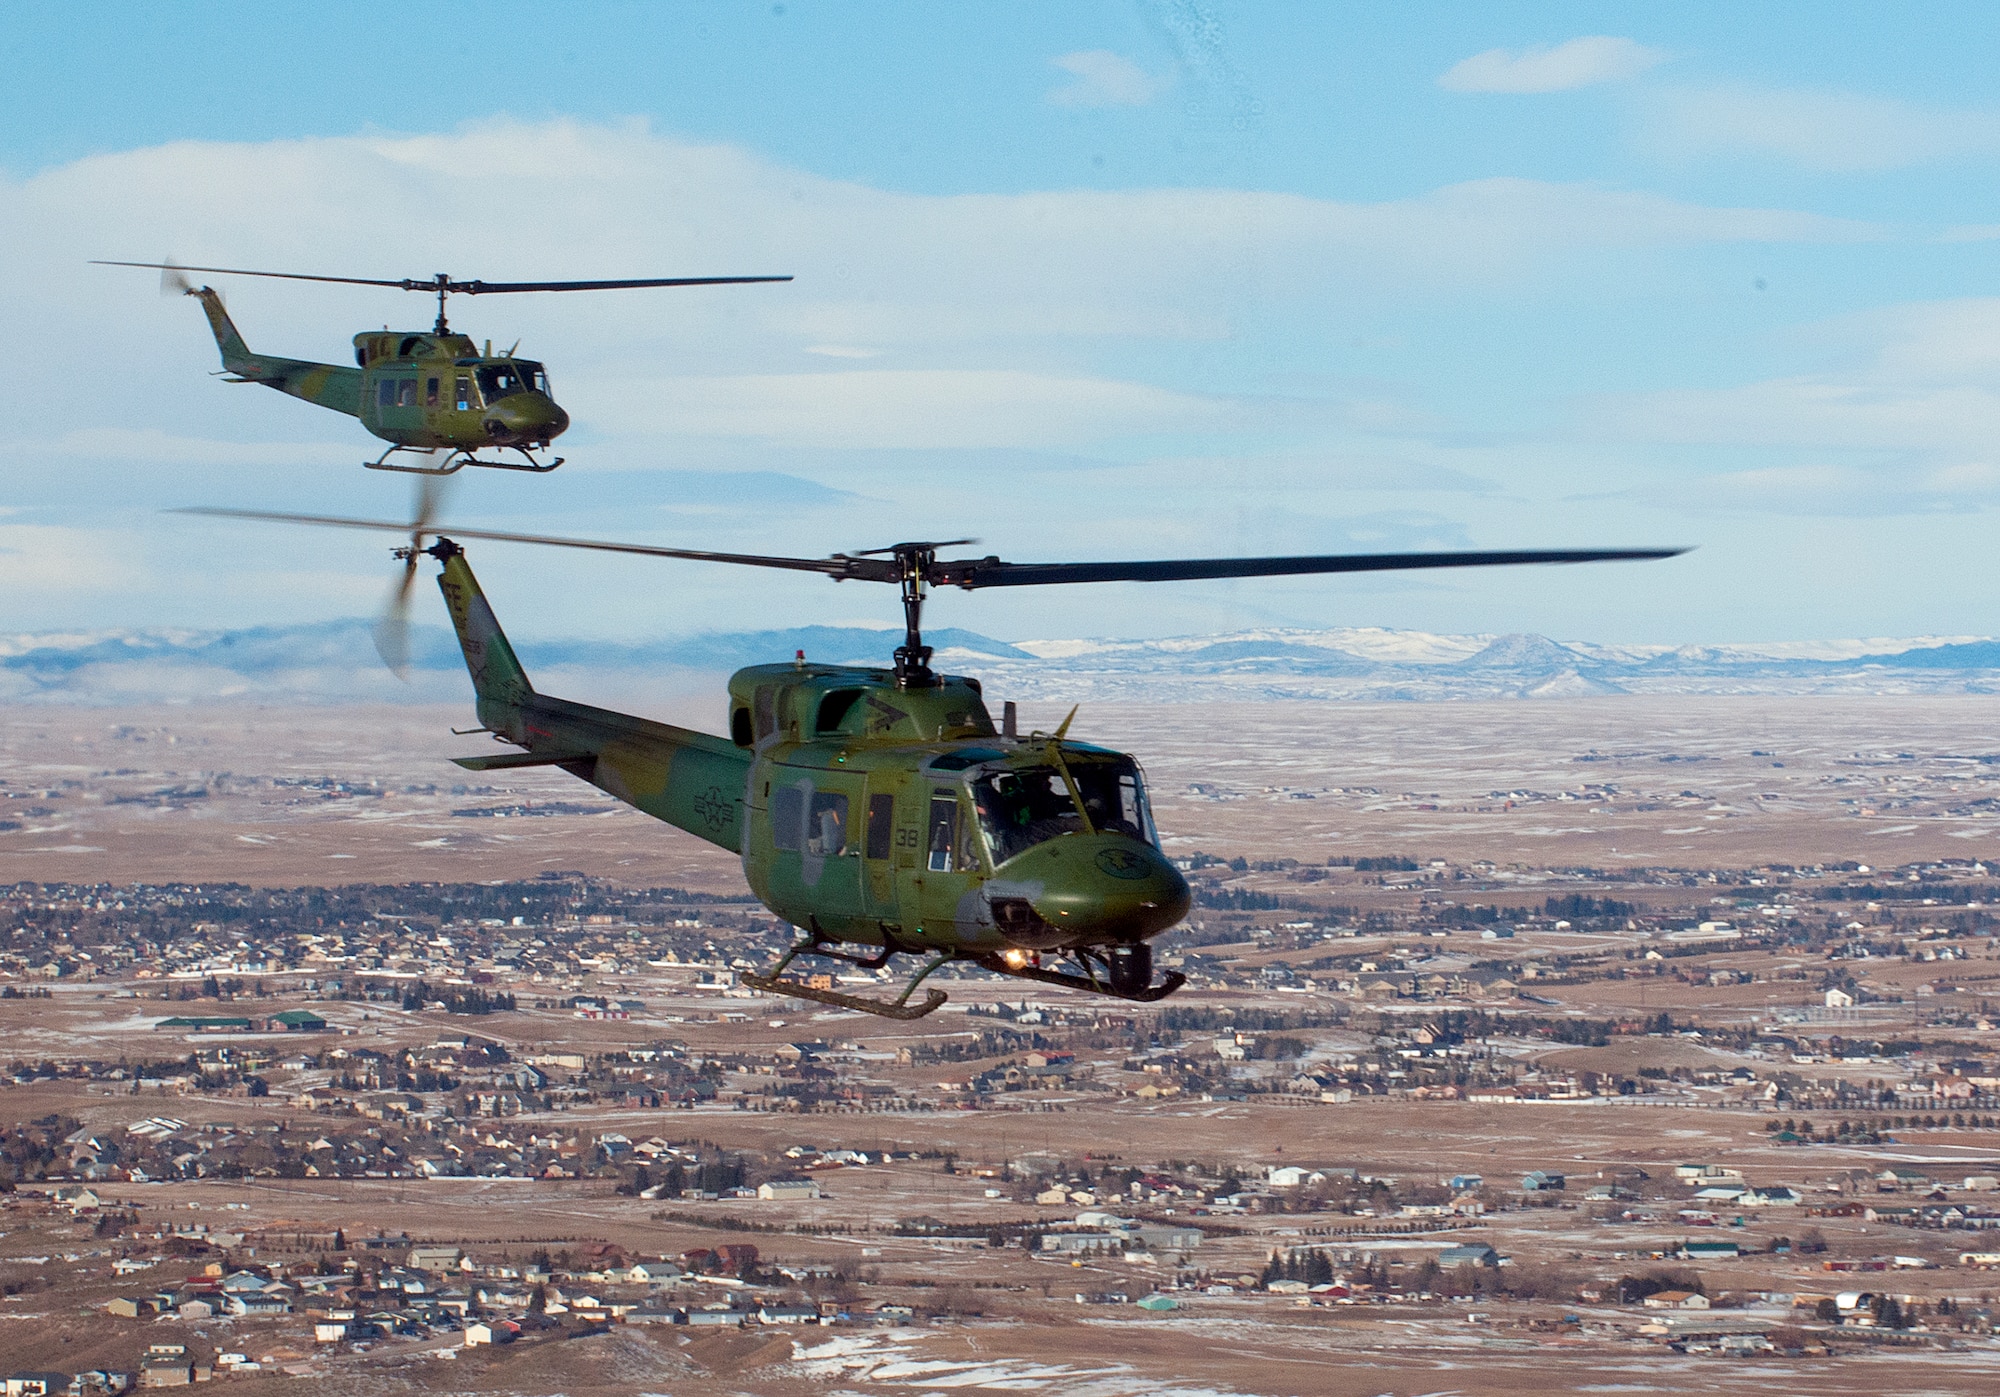 Two UH-1N helicopters from the 37th Helicopter fly over Cheyenne, Wyo.